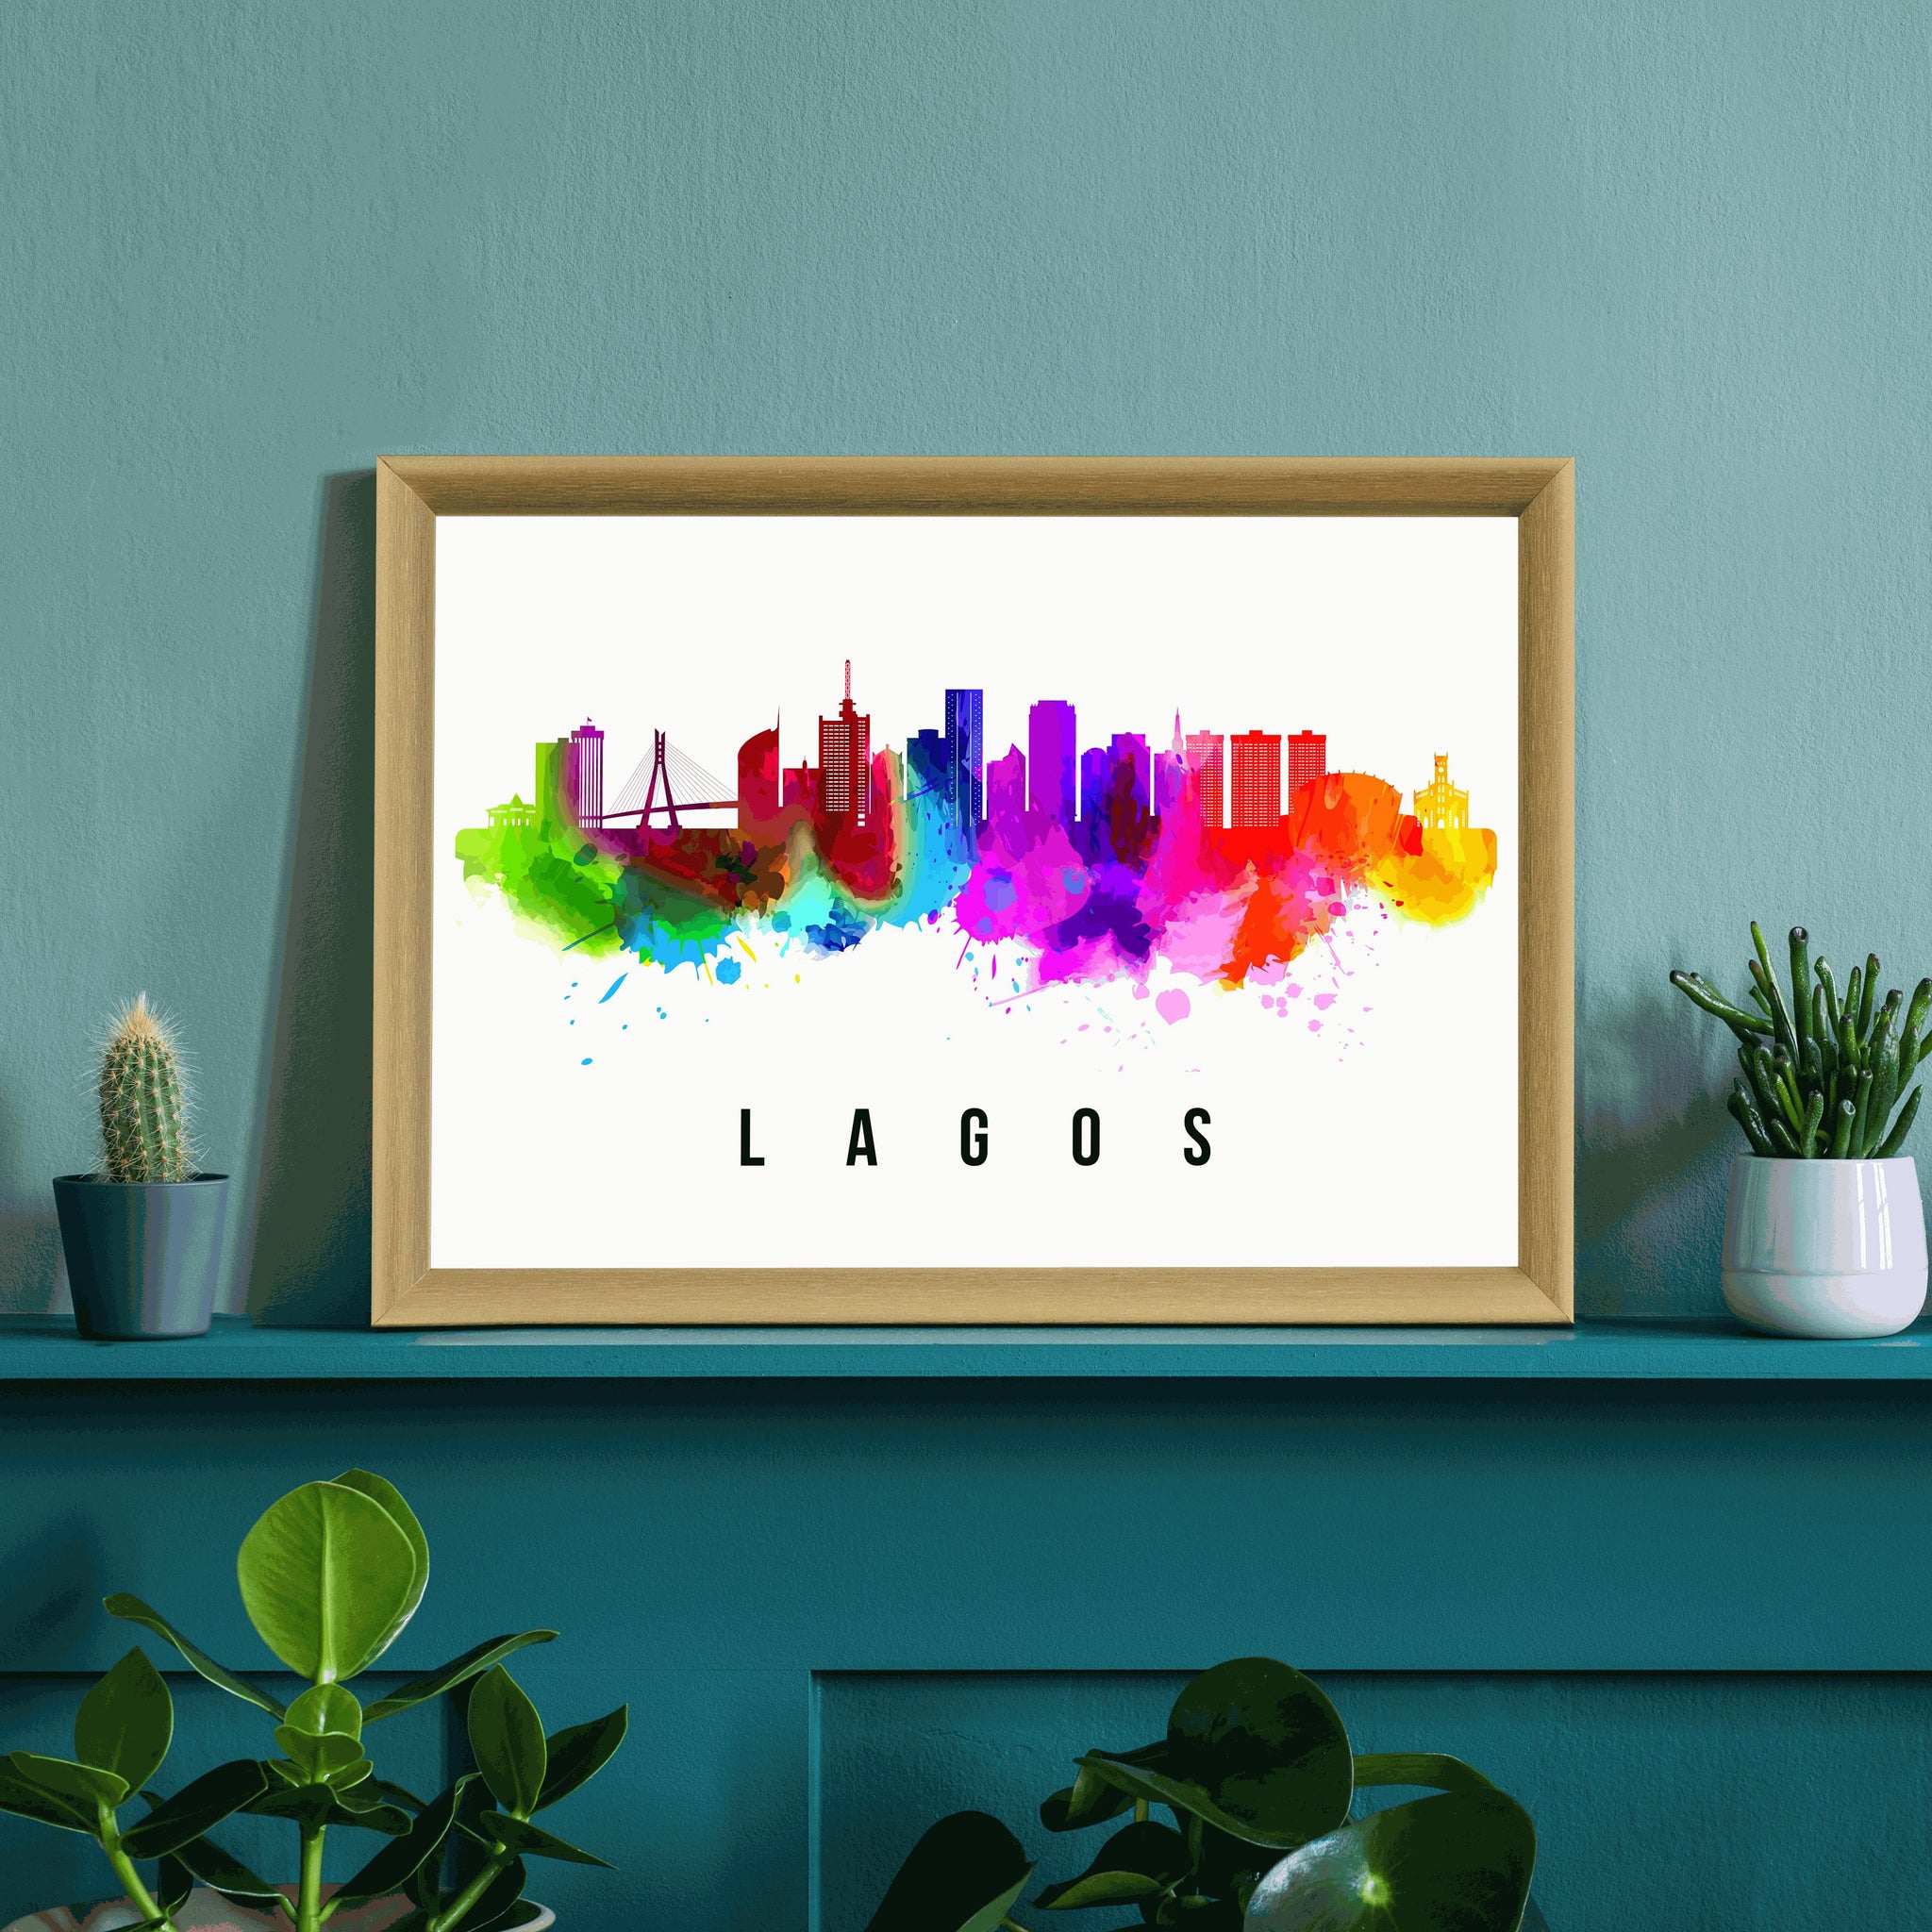 LAGOS - SOUTH AFRICA Poster,  Skyline Poster Cityscape and Landmark Print, Lagos Illustration Home Wall Art, Office Wall Decor